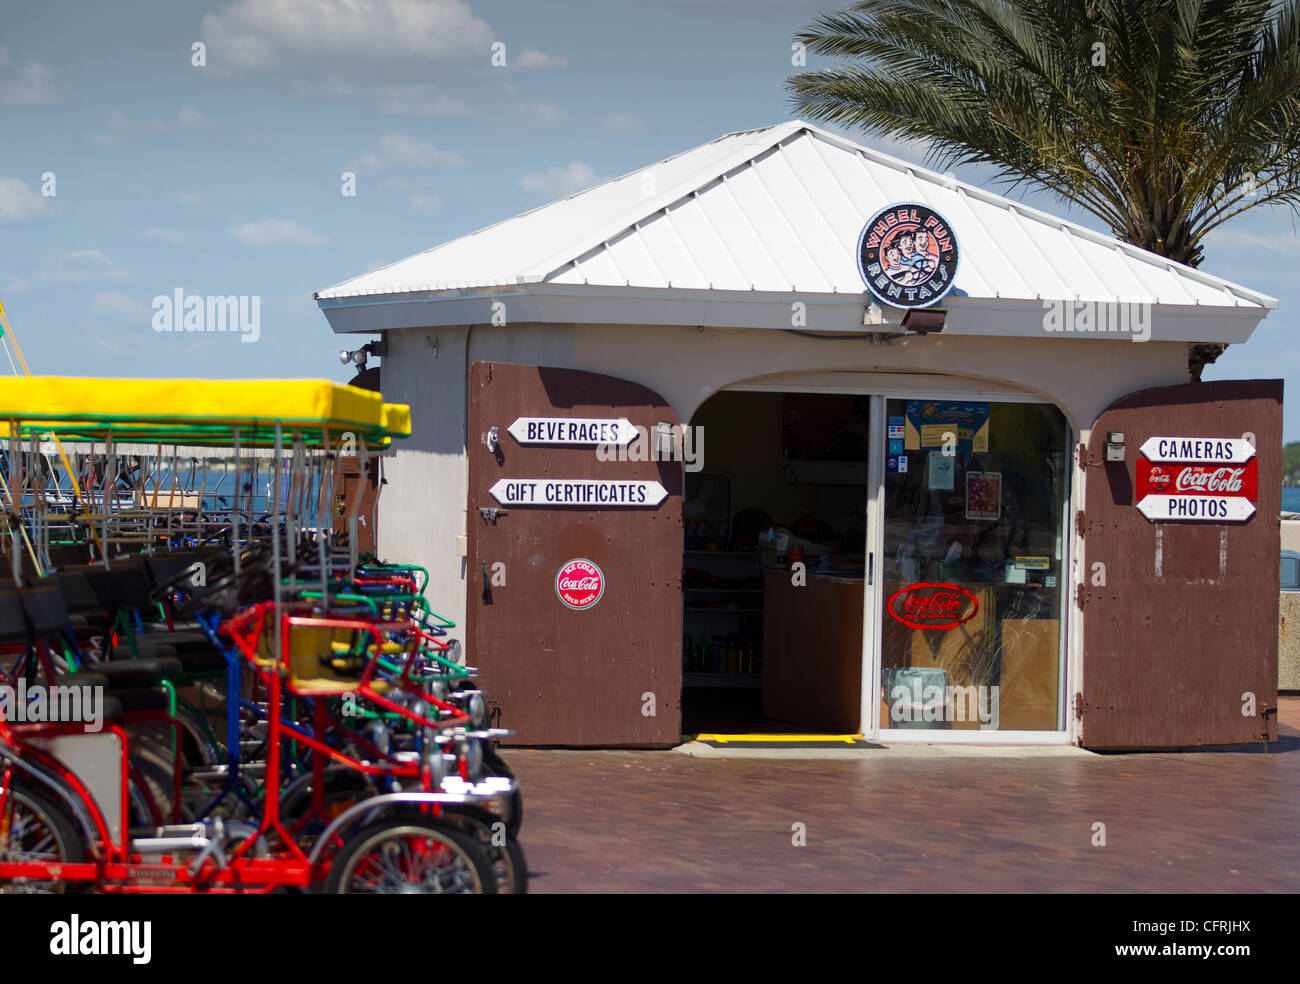 Cycles at a tourist location in St. Petersburg, Florida Stock Photo